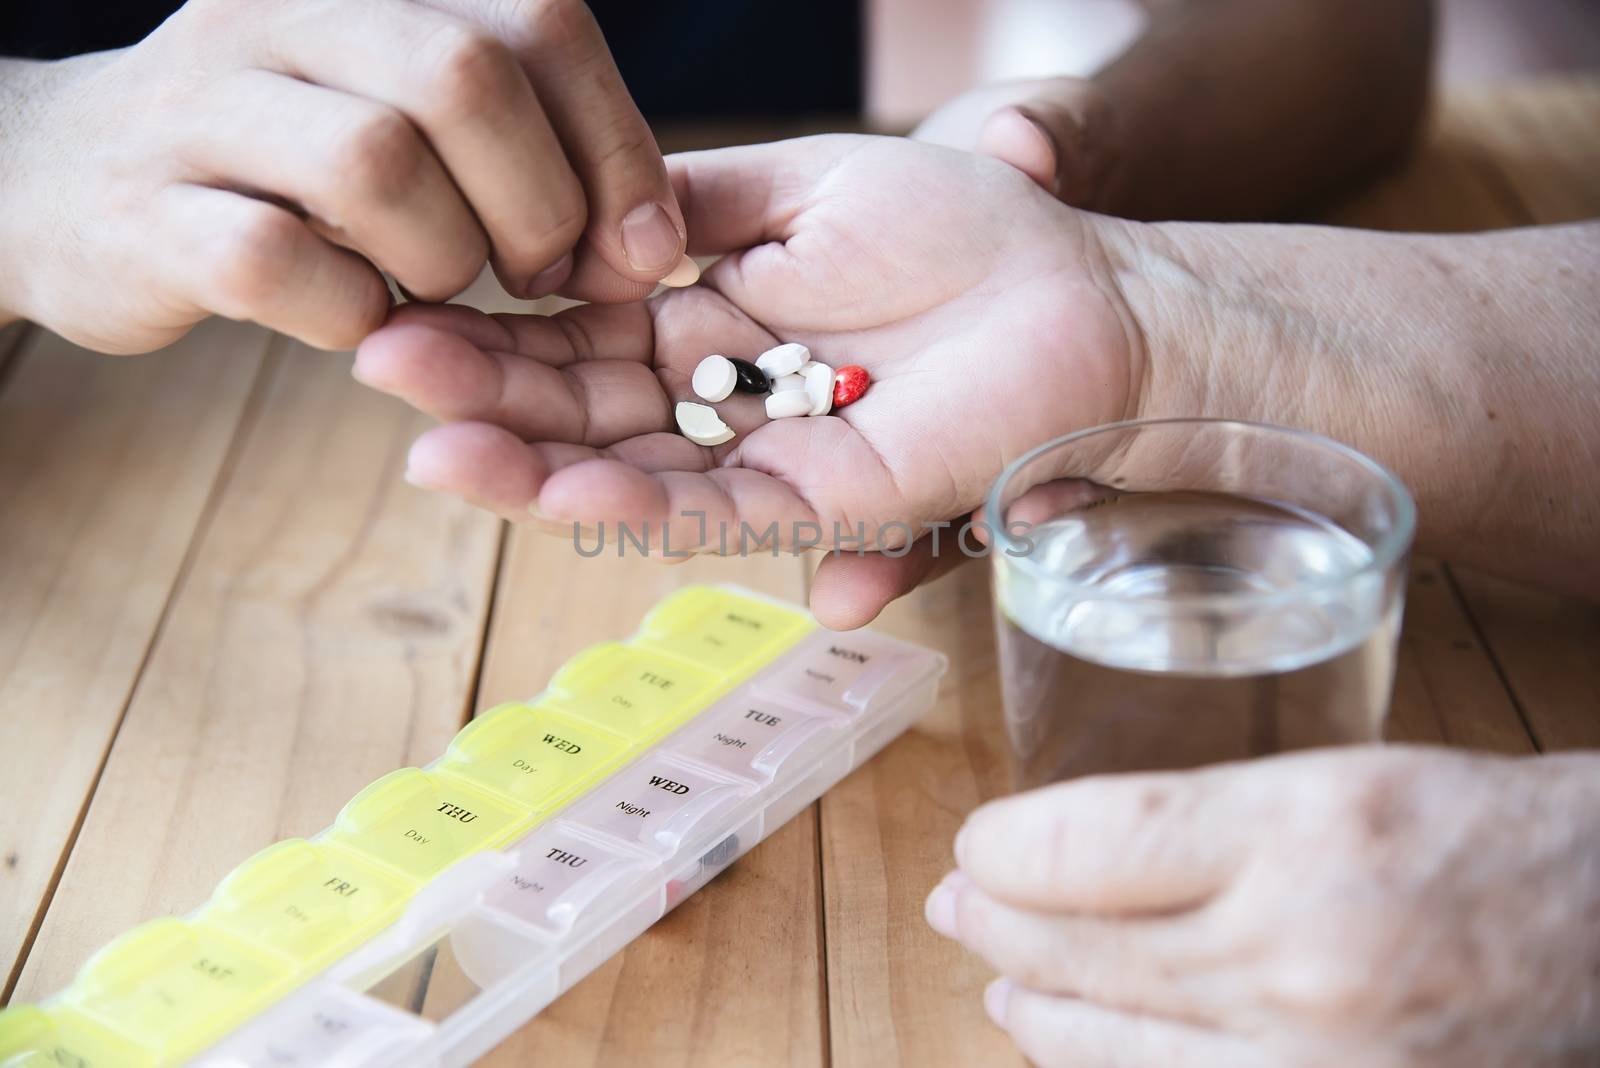 Doctor is assist patient to eat medicine tablet in pillbox correctly - people medical concept